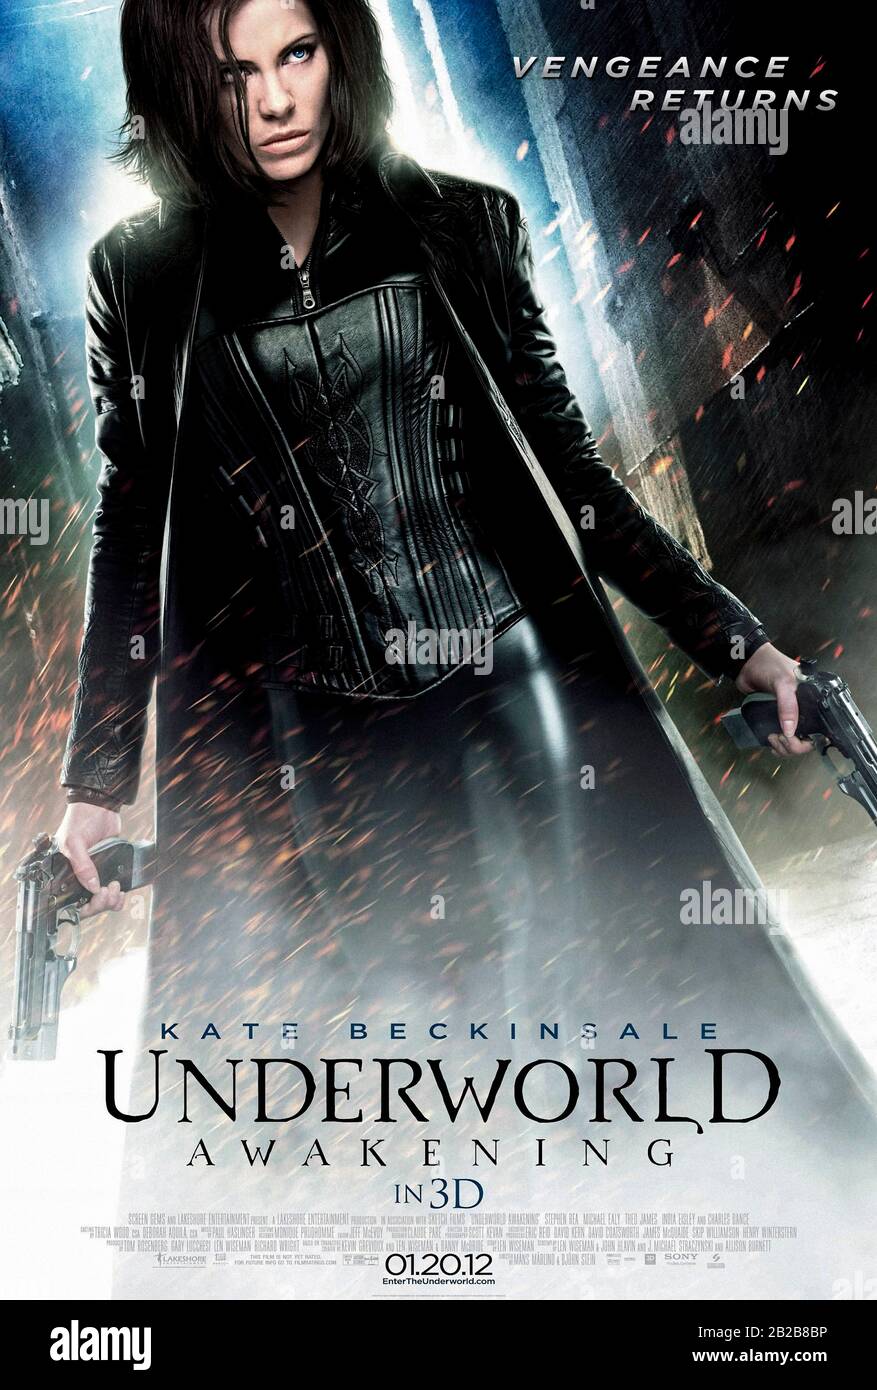 Underworld: Awakening  (2012) directed by Måns Mårlind and Björn Stein and starring Kate Beckinsale, Michael Ealy, India Eisley and Charles Dance. When the humans discover the existence of vampires and werewolves Selene the vampire warrior unites them against mankind. Stock Photo